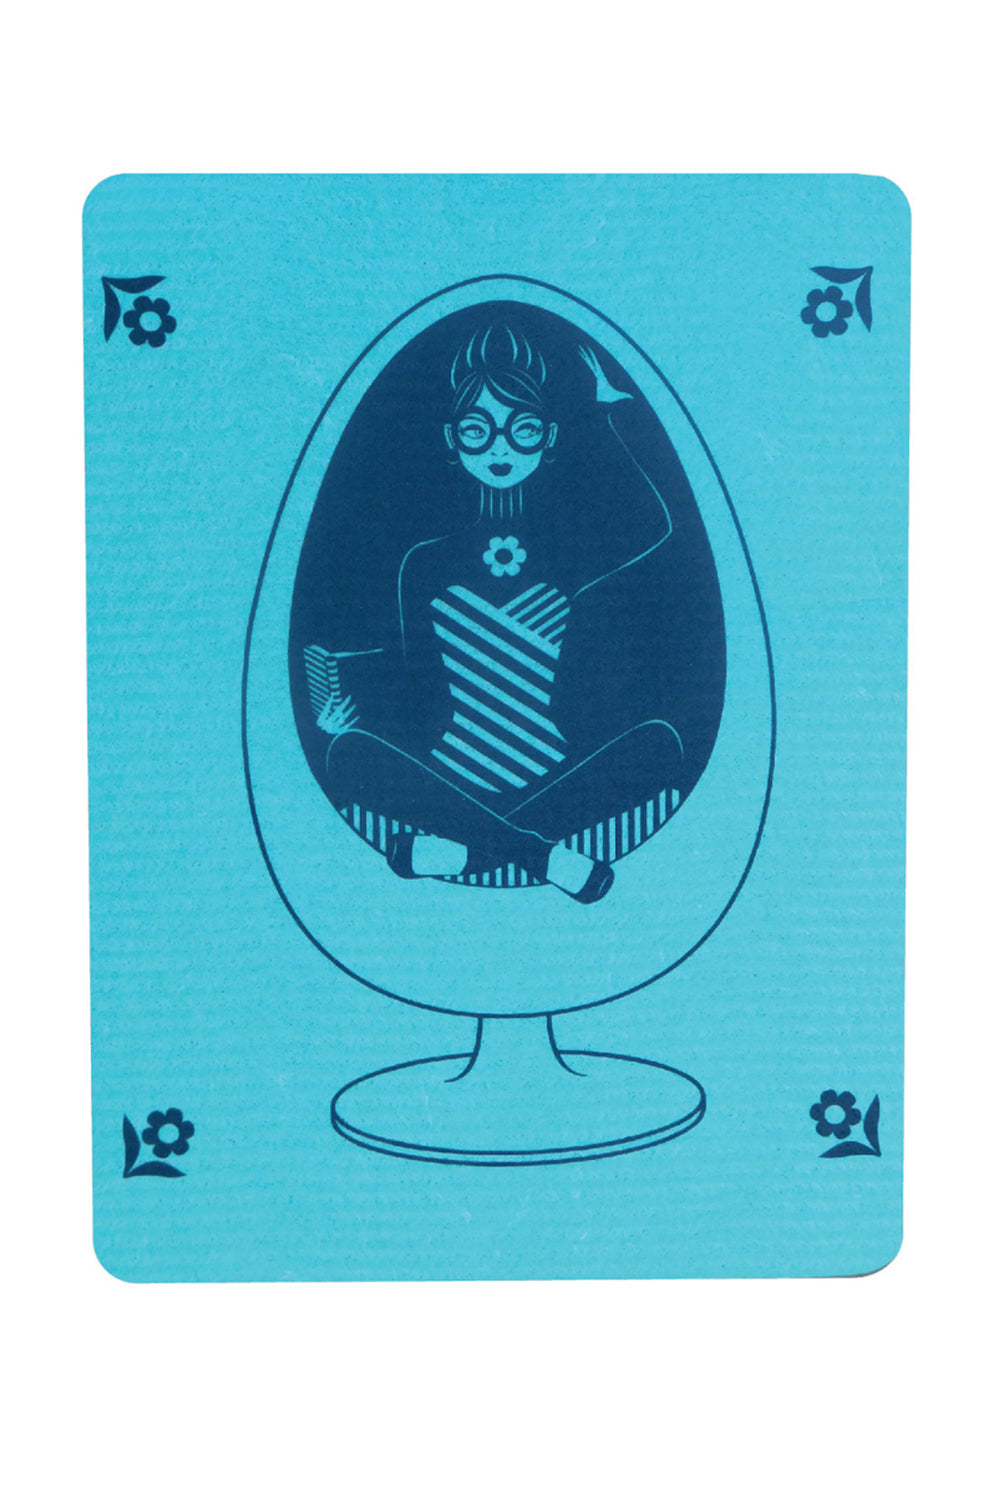 Blue Swedish dishcloth with grey graphic of a girl reading a book in an egg chair